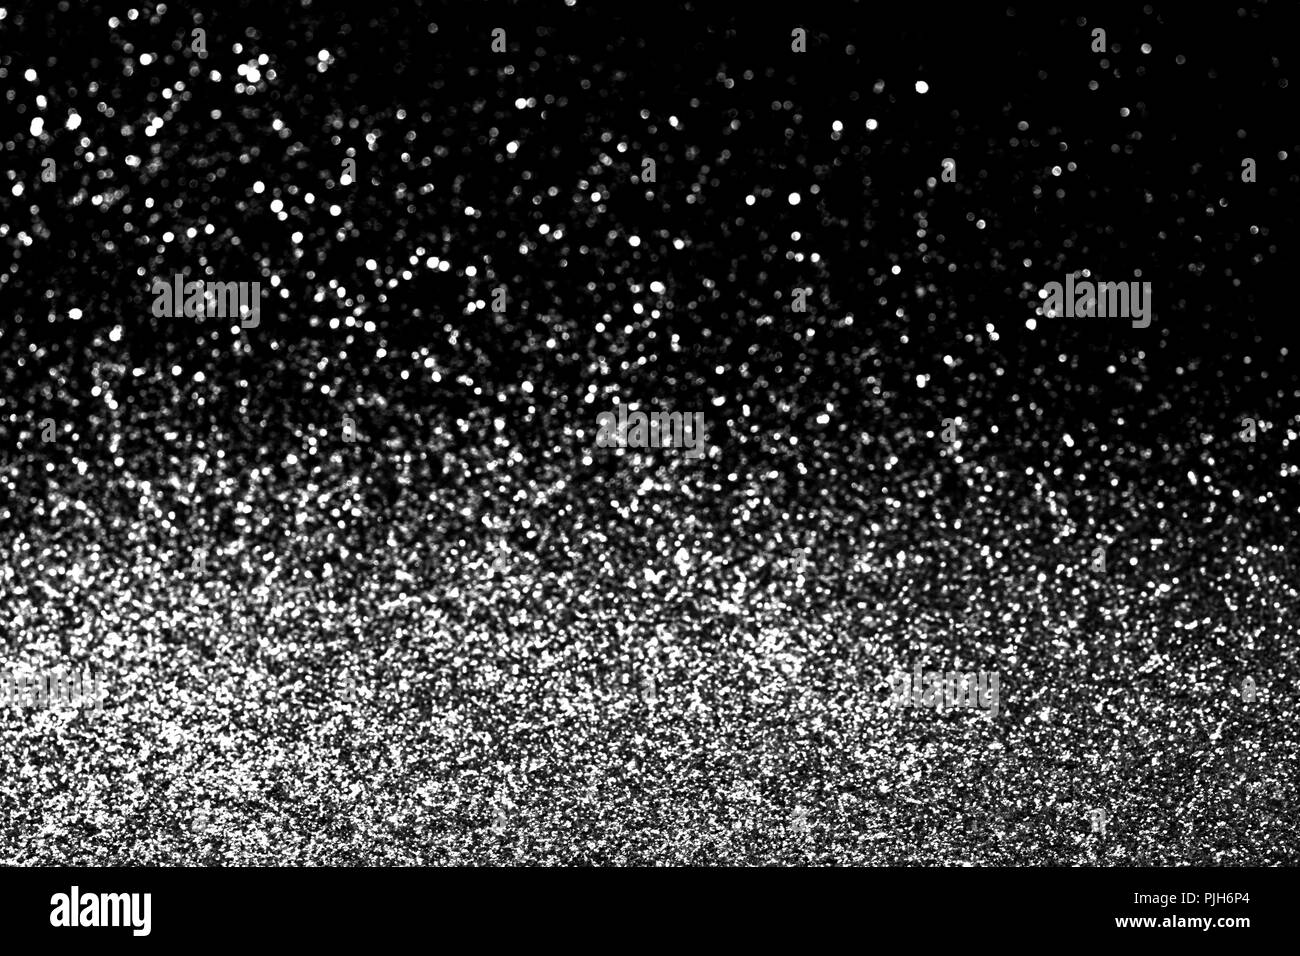 Silver glitter background with sparkling texture. Silver shimmering light,  stars sequins sparks and glittering glow foil background Stock Illustration